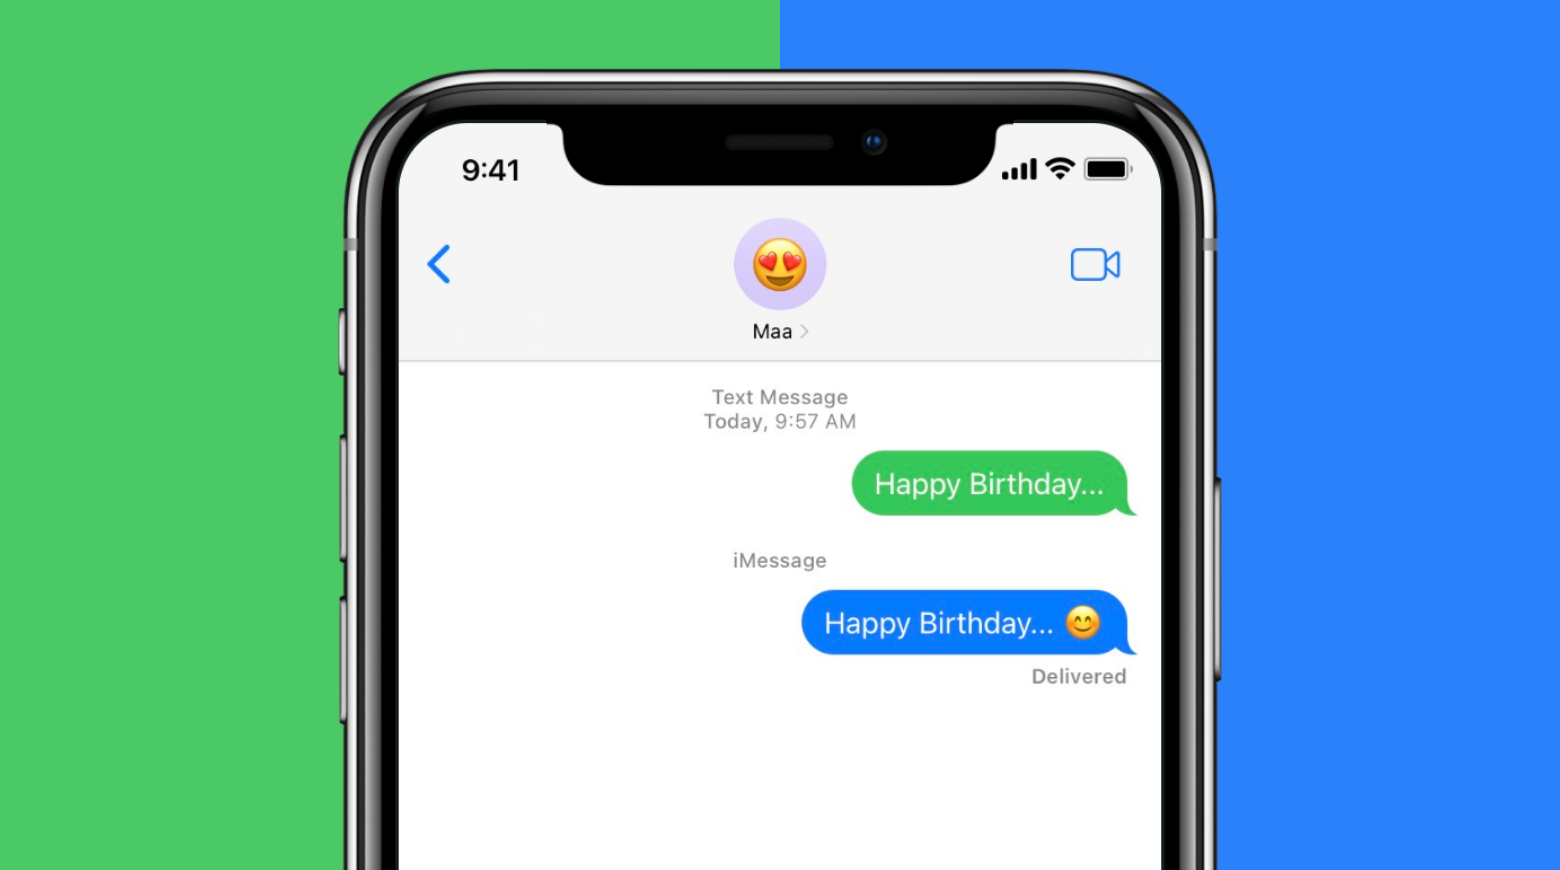 Blue and green chat bubbles in the iPhone Messages app